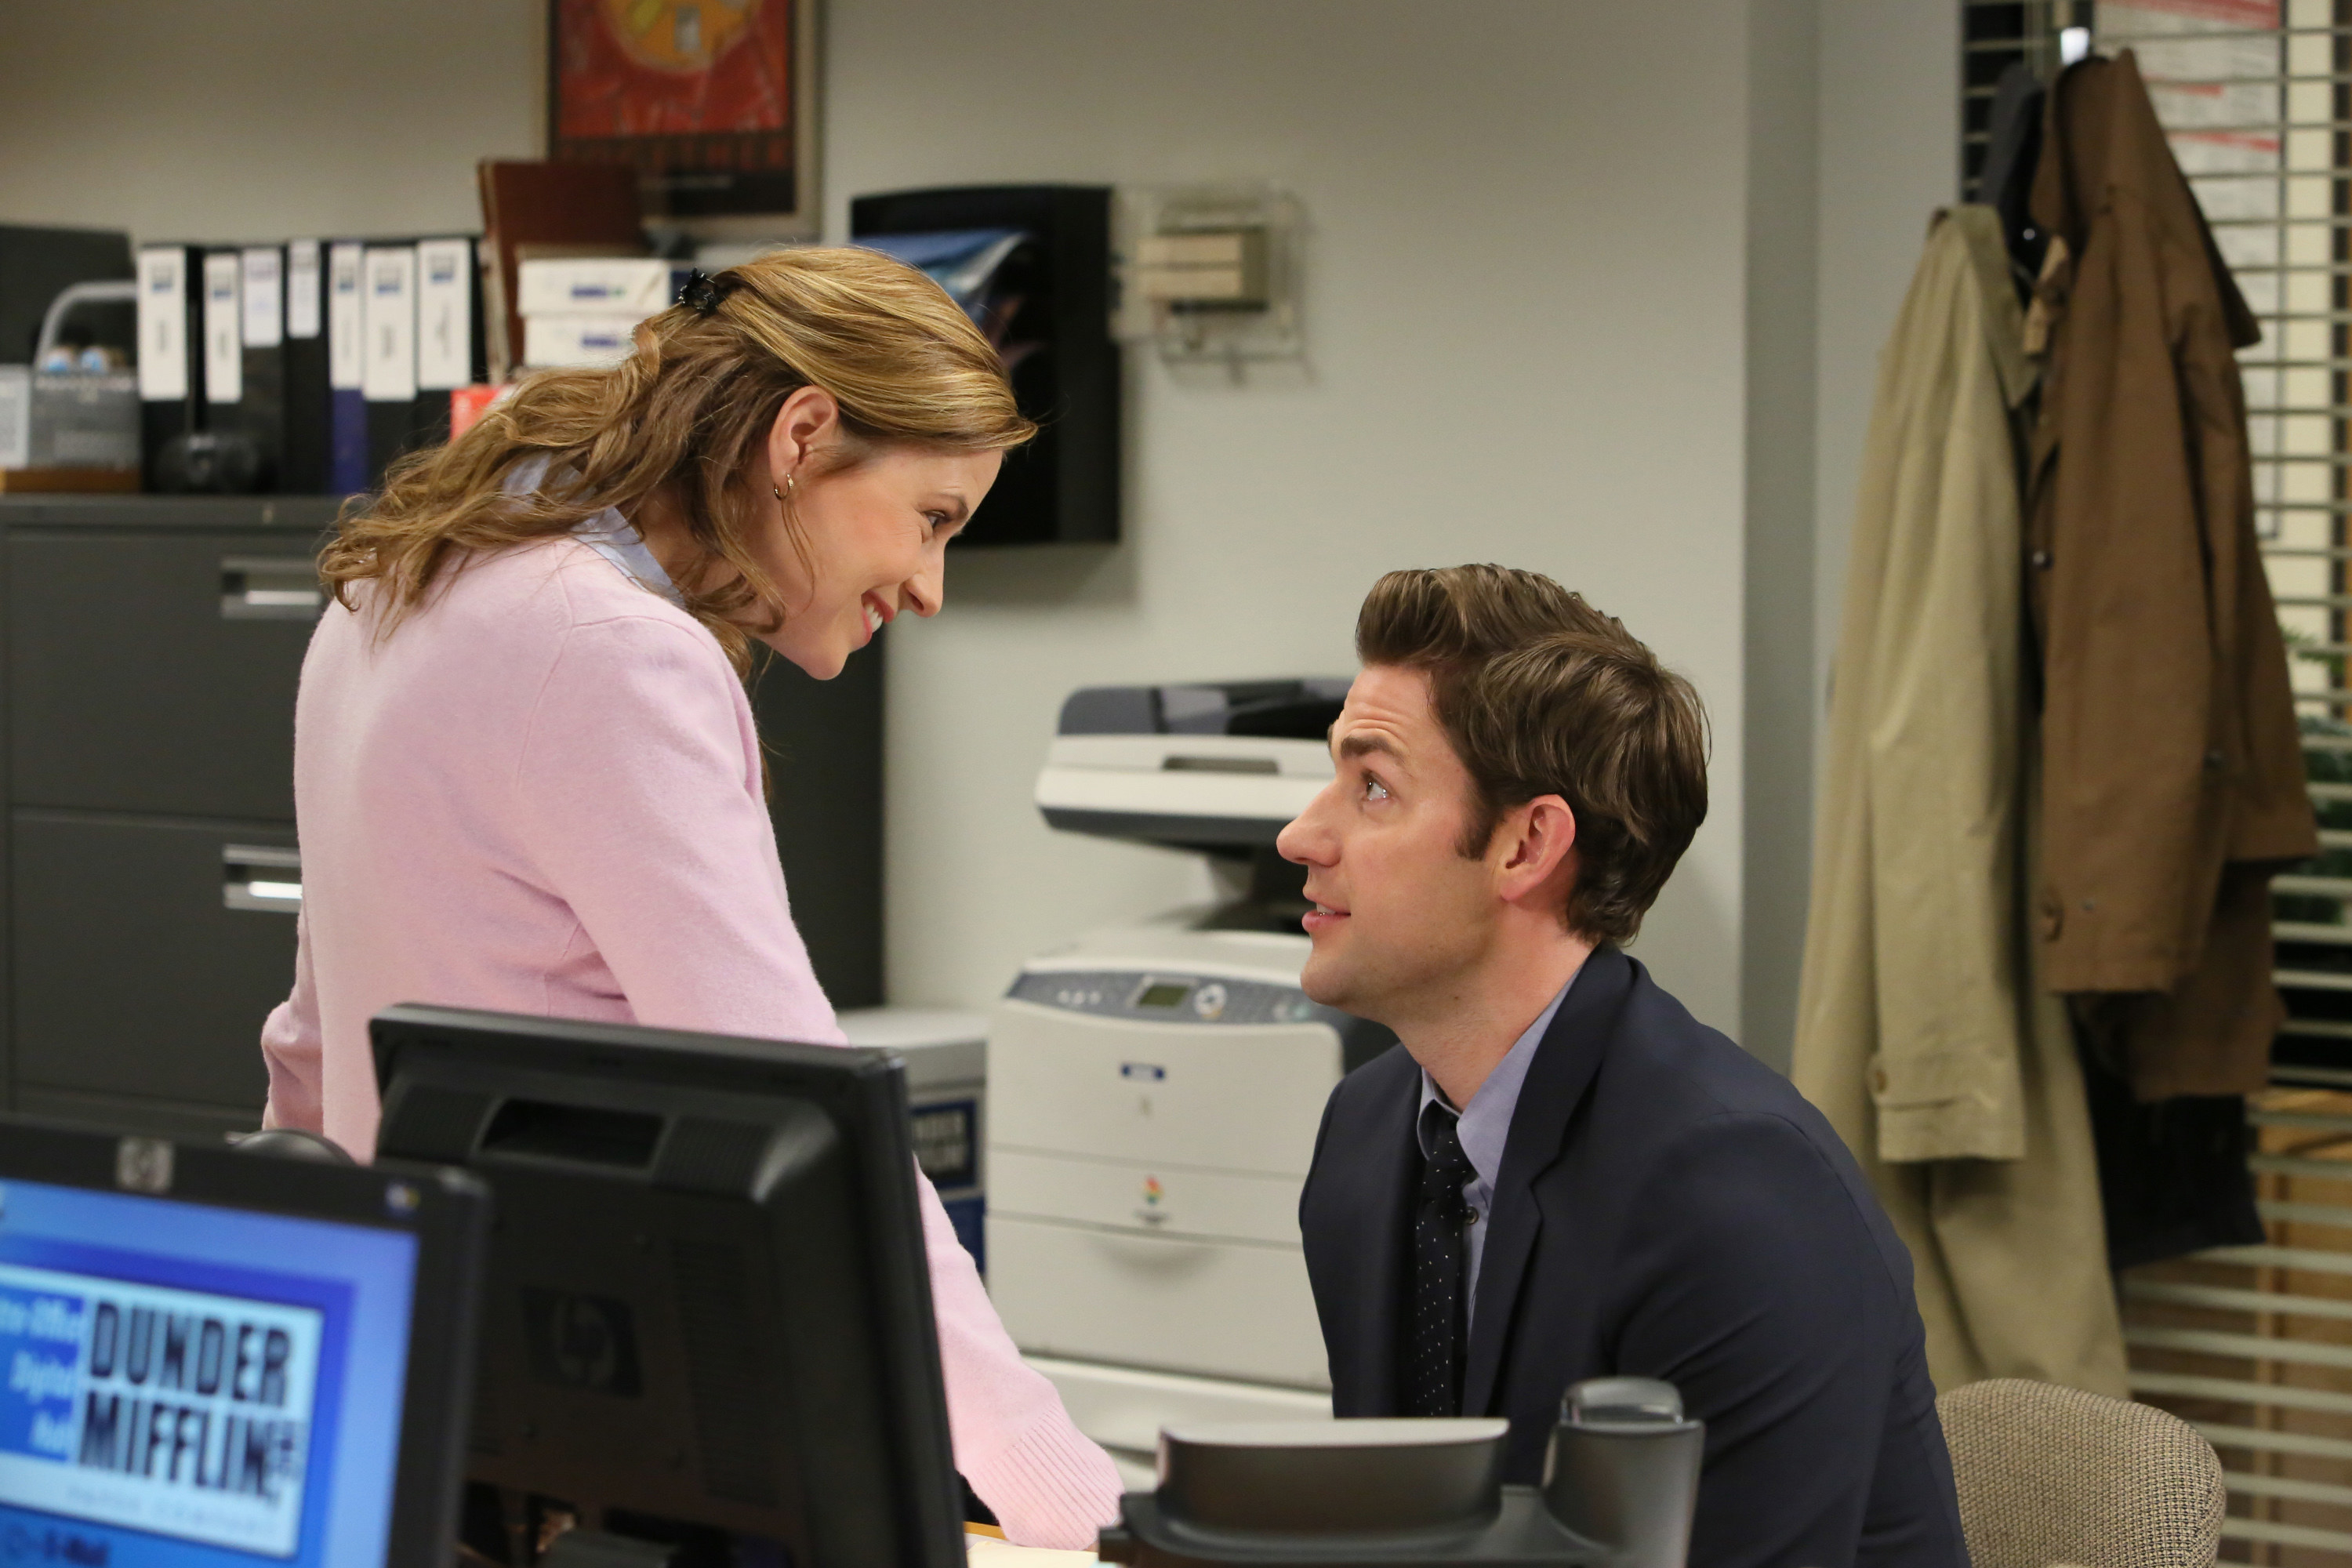 Jim and Pam speaking in the office